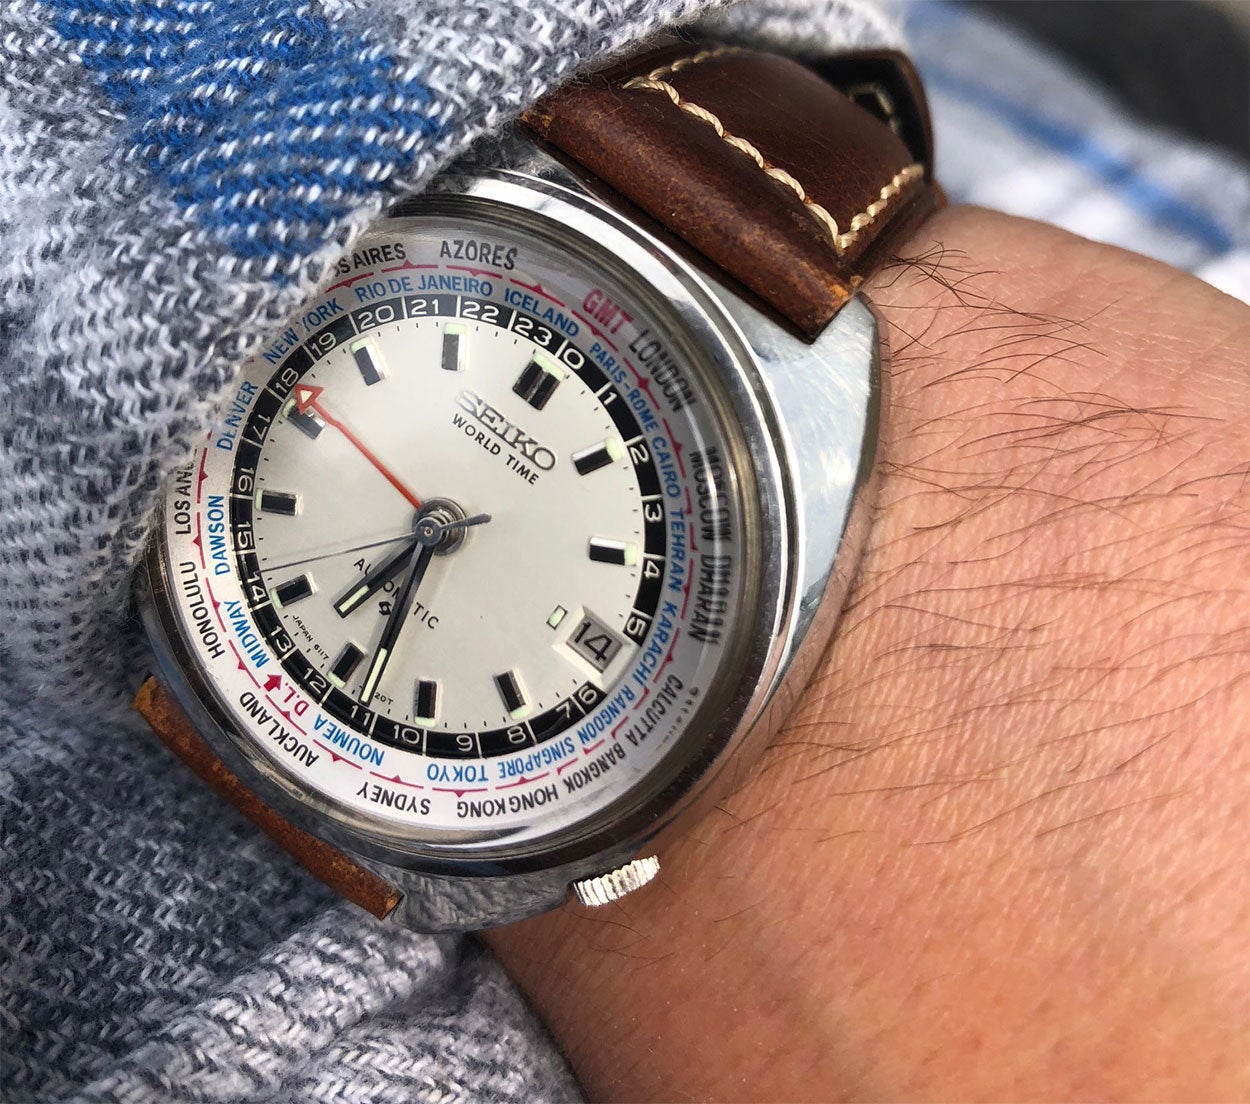 What are your favorite vintage World Time watches? | WatchUSeek Watch Forums